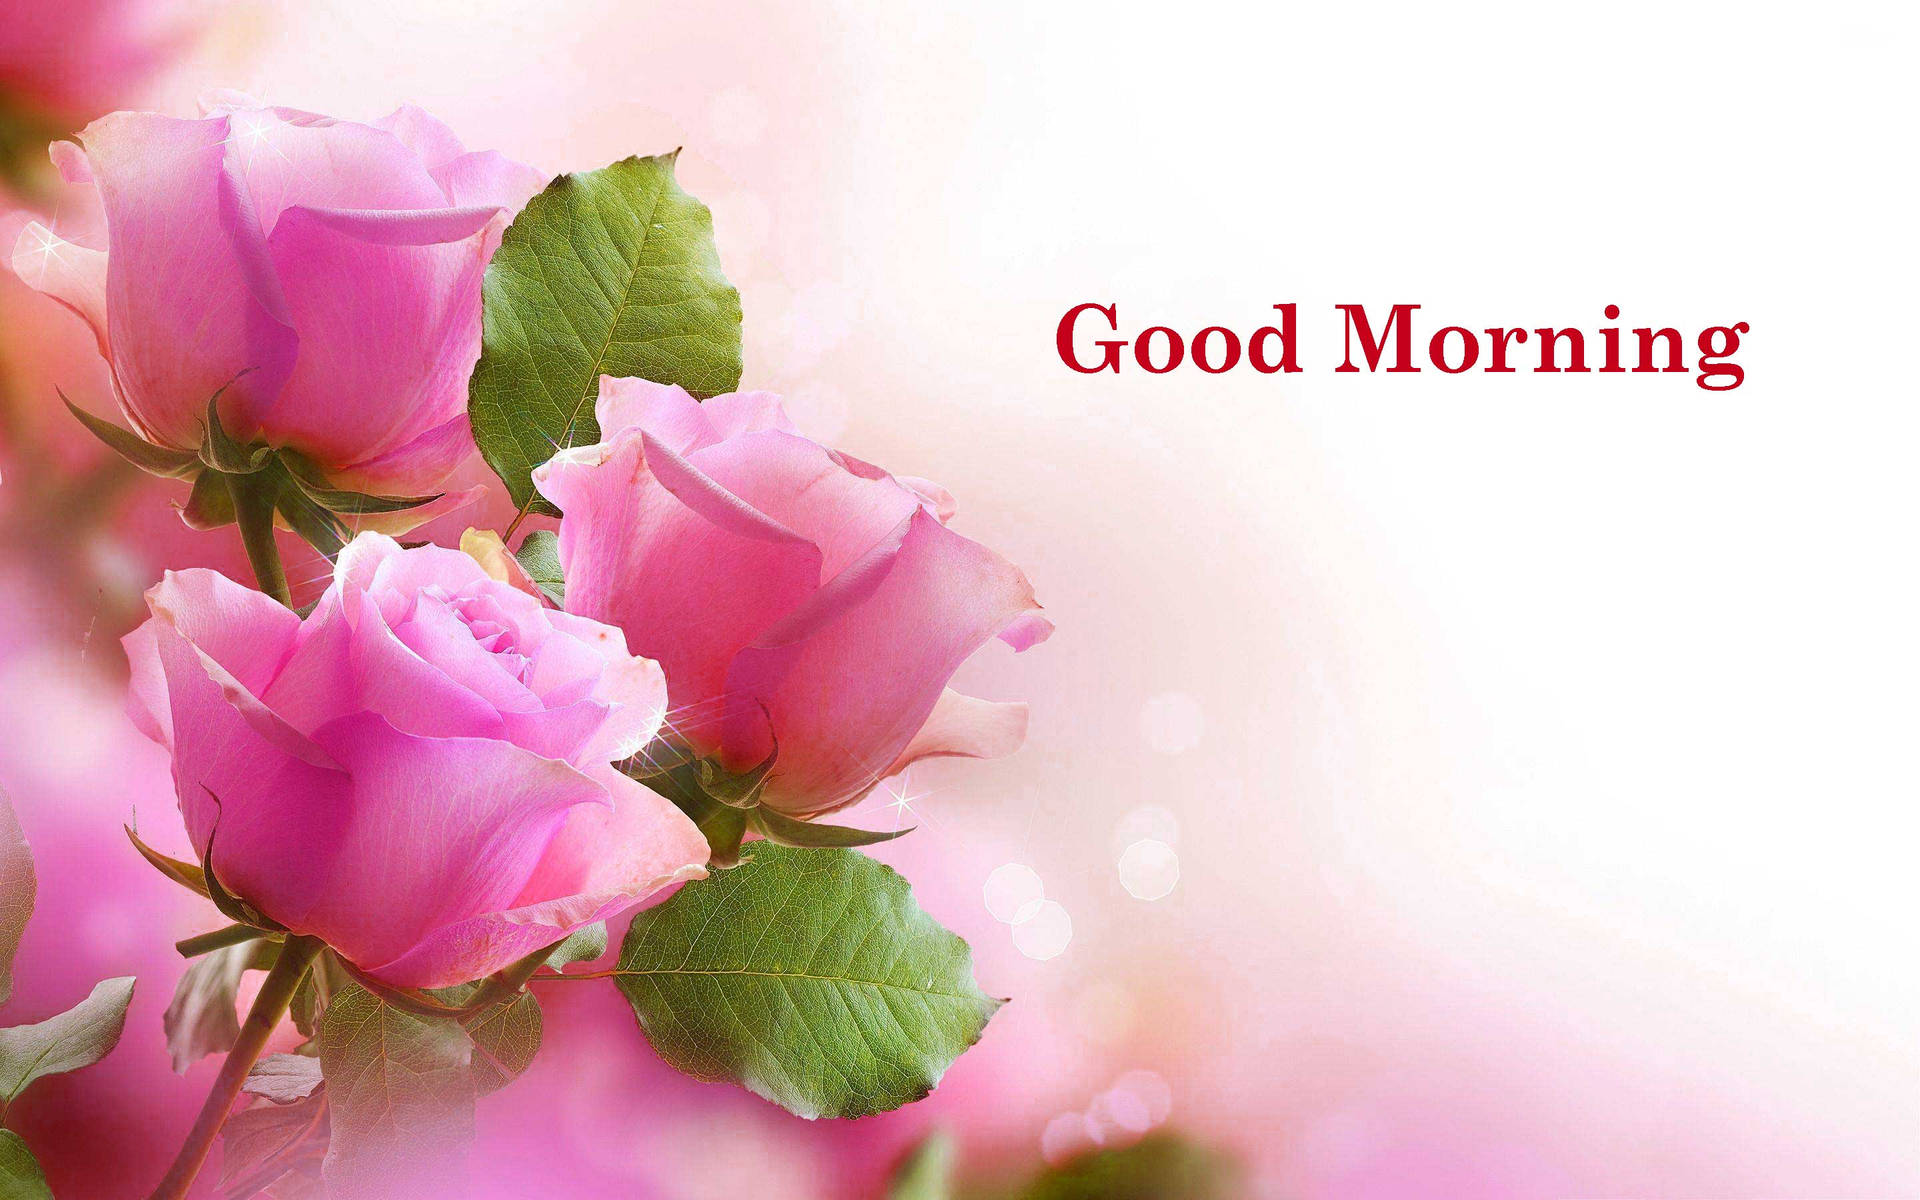 Good Morning Hd With Pink Flowers Background